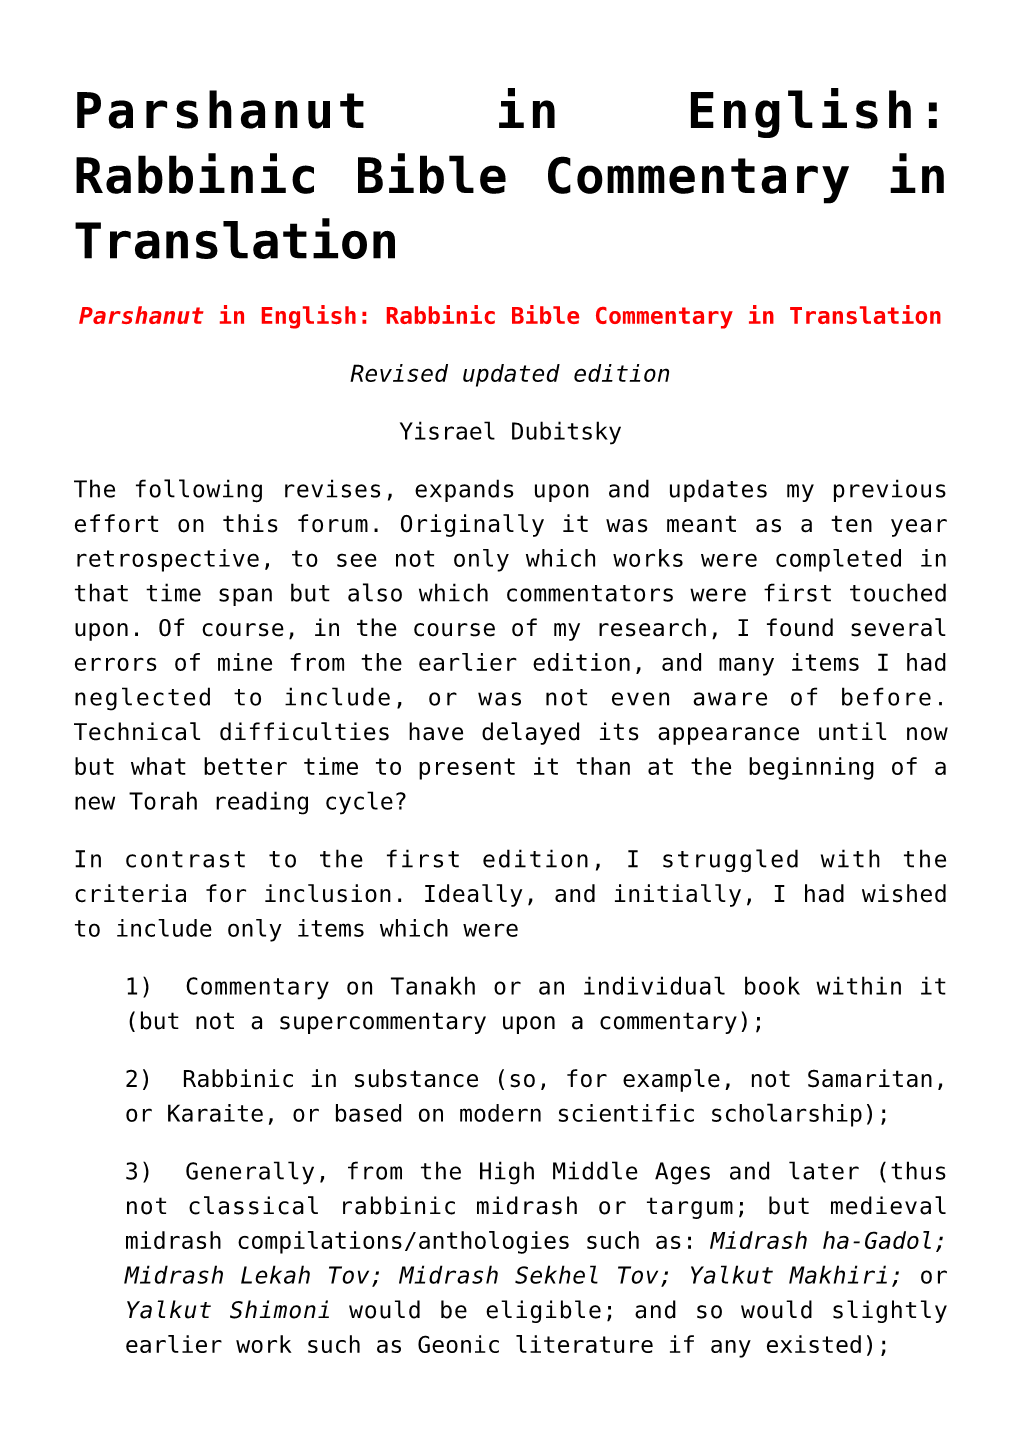 Rabbinic Bible Commentary in Translation